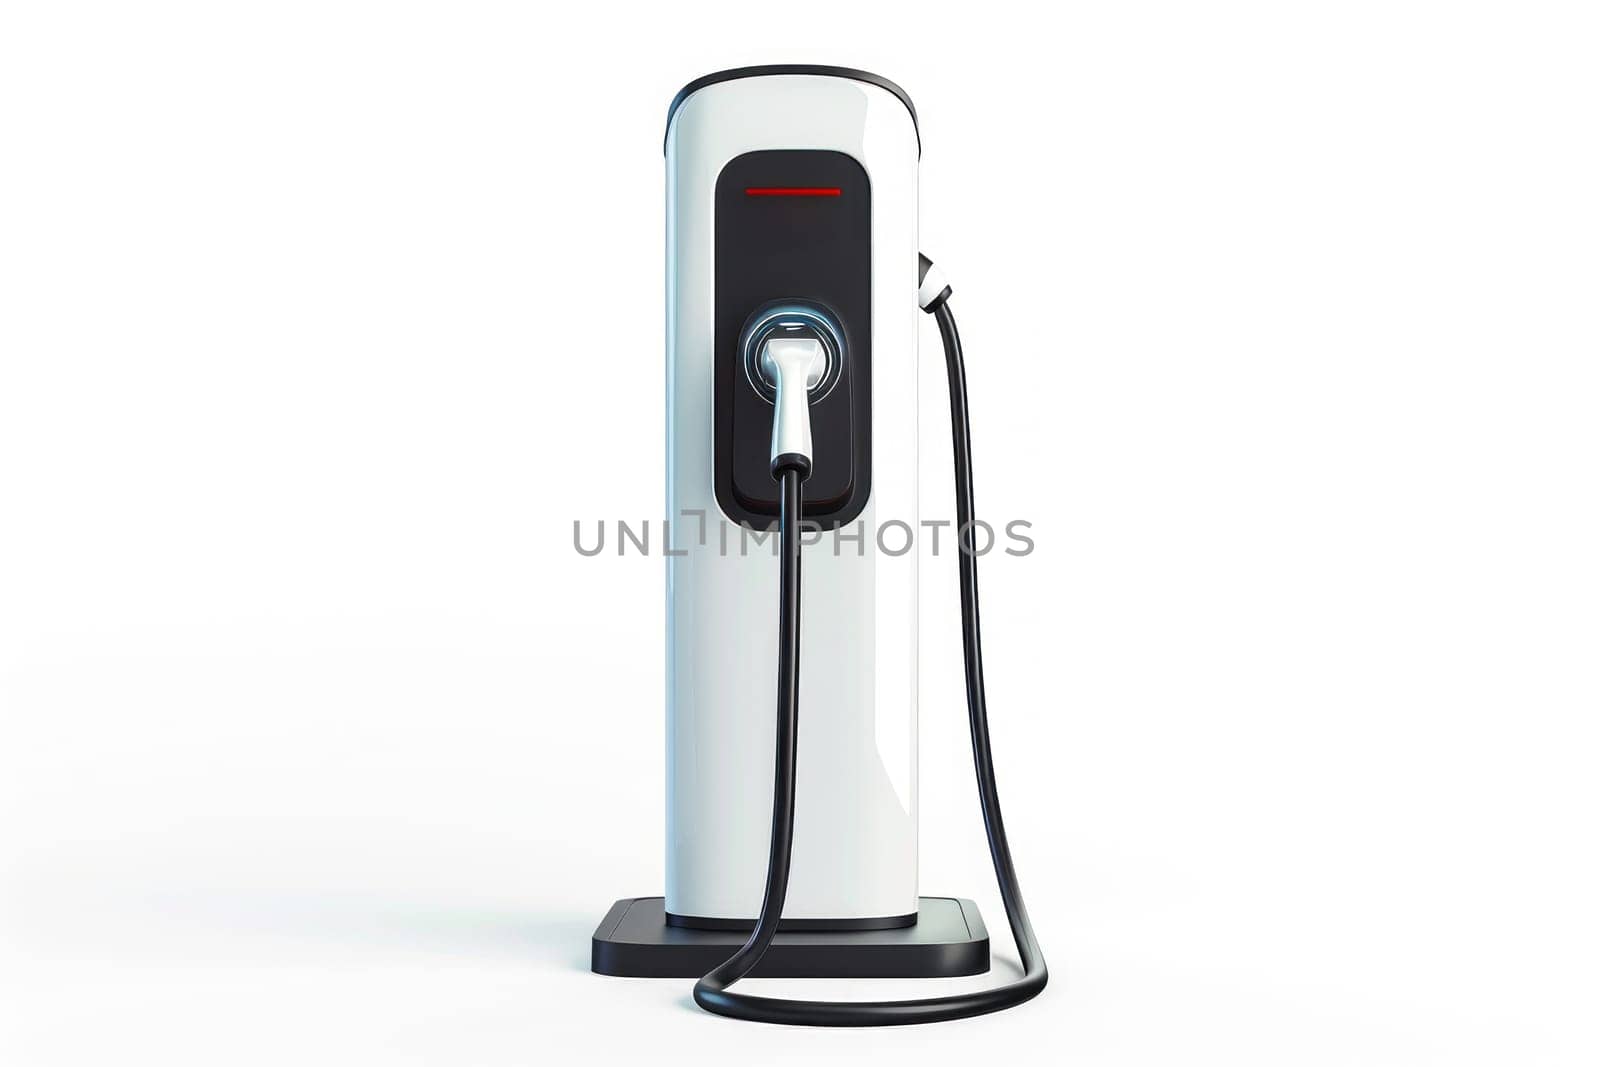 Electric Car Charging Station Isolated on White Background Concept Clean Energy Technology.